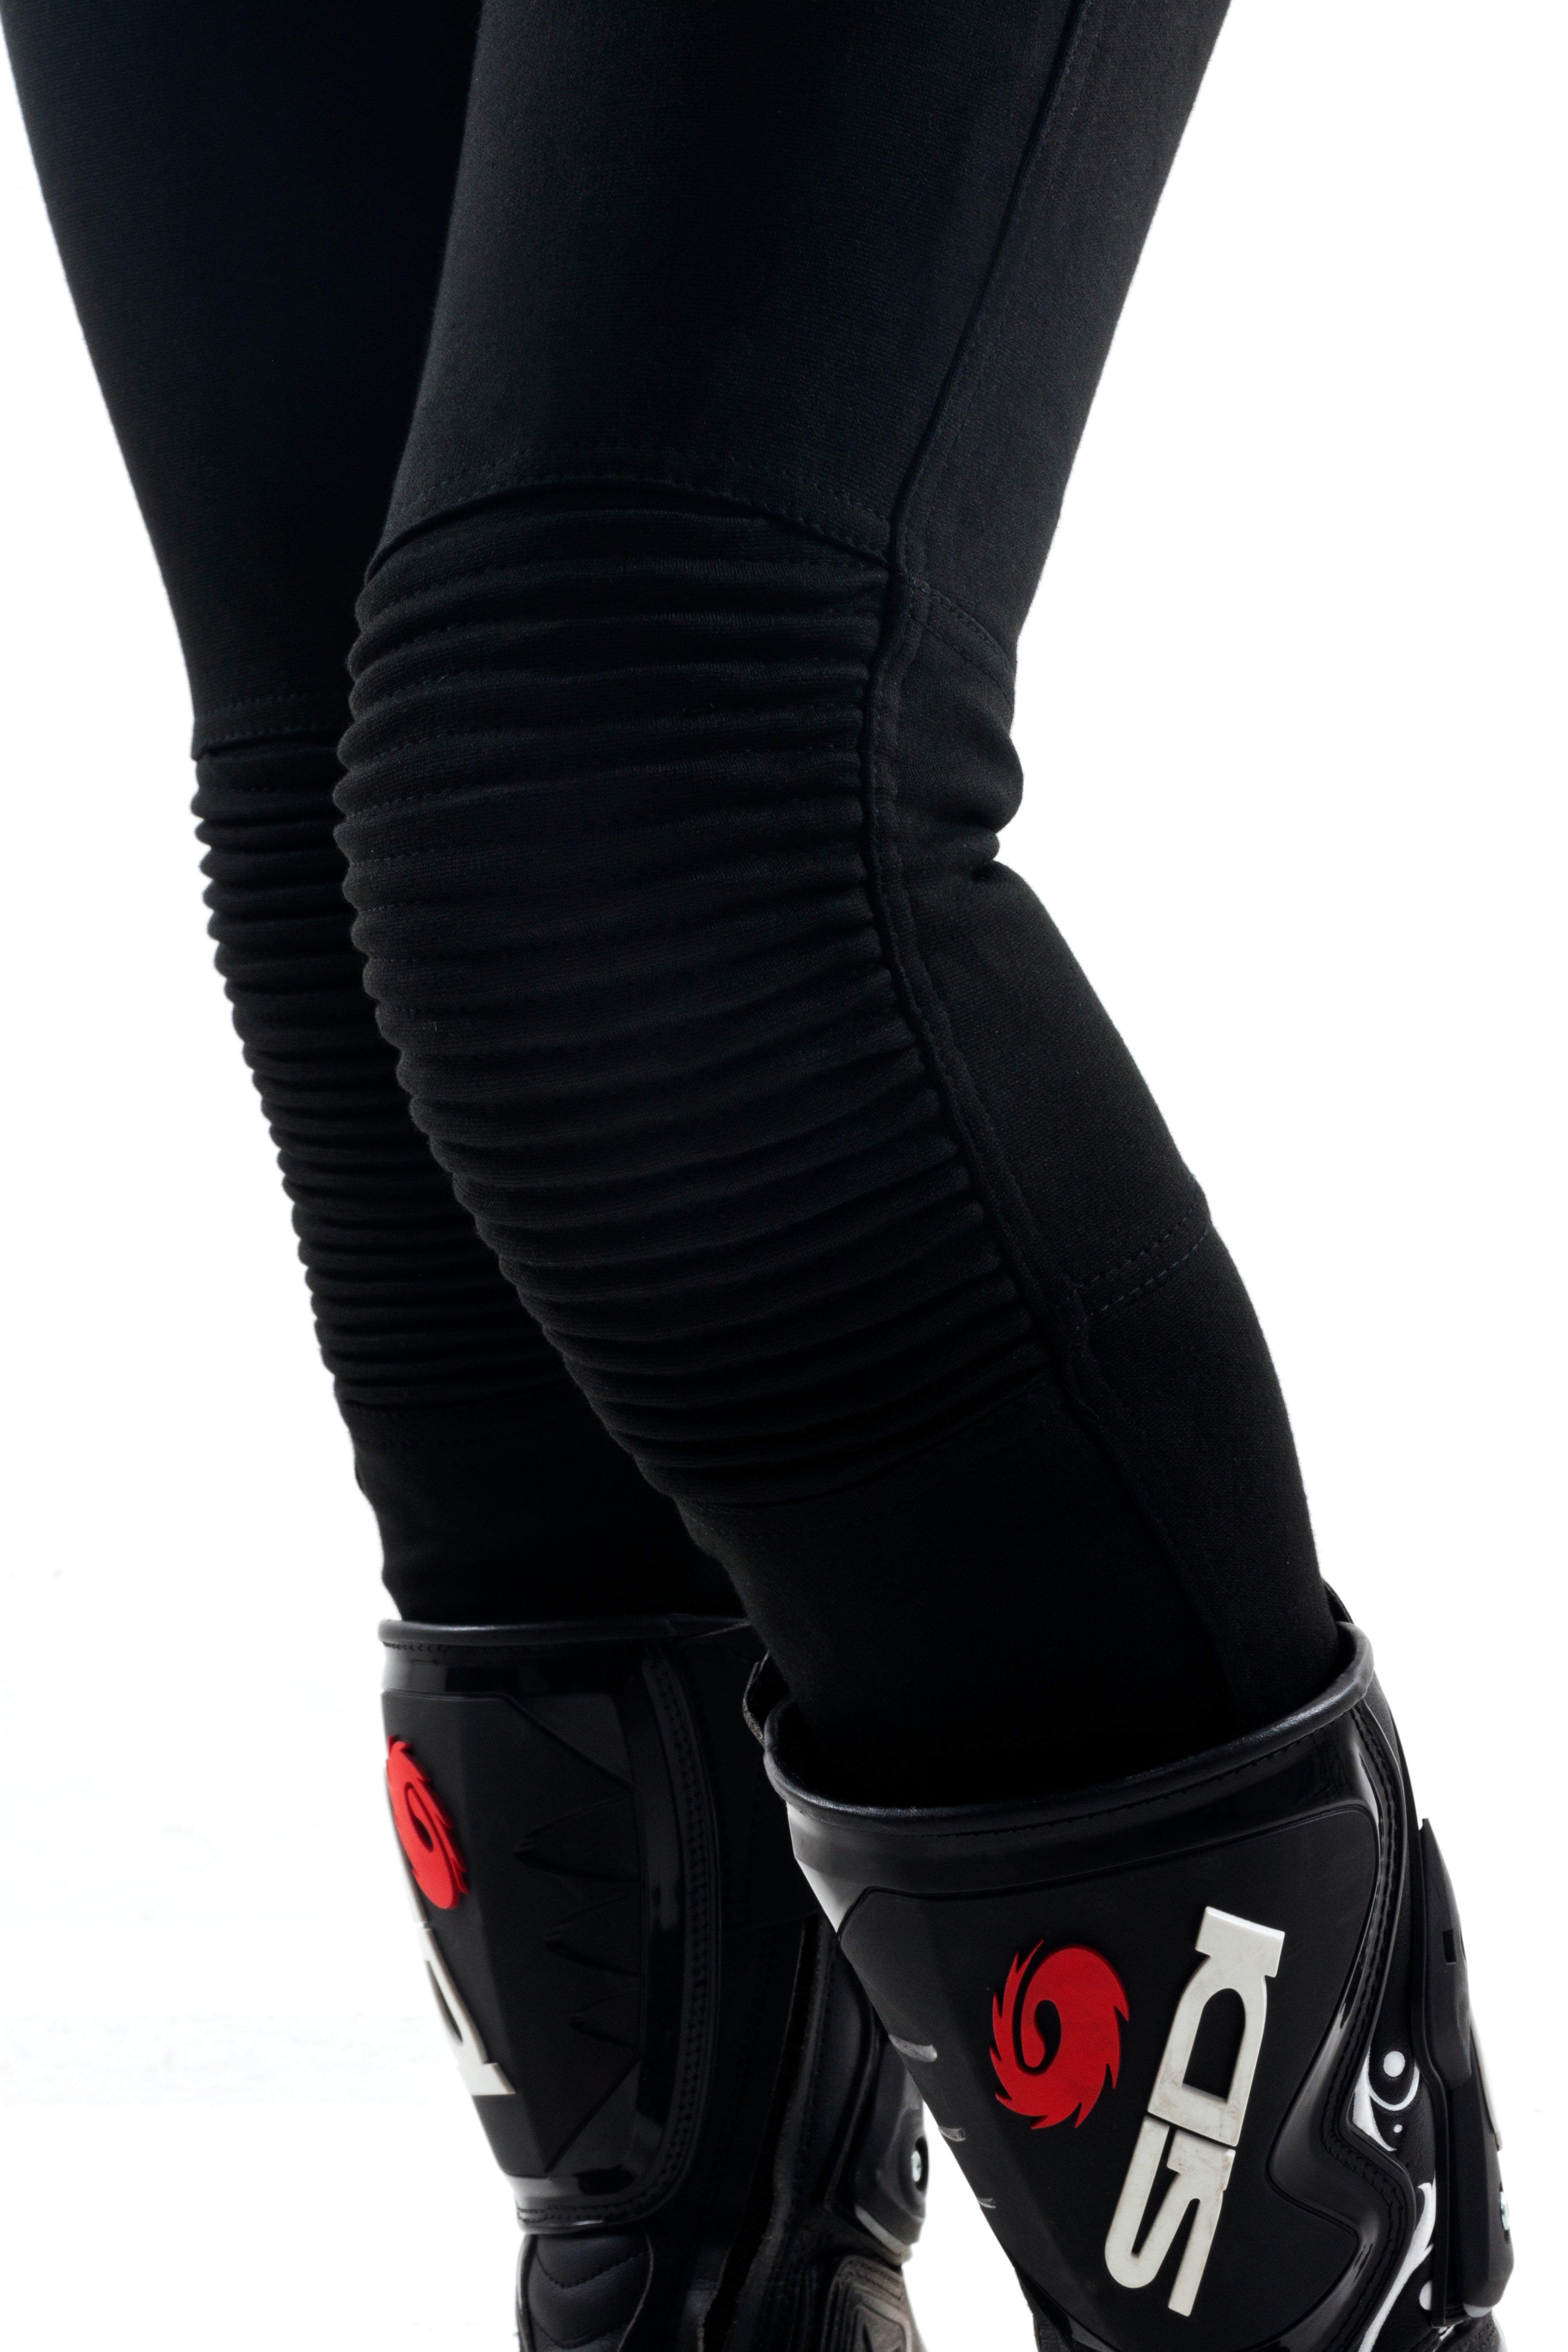 Black women's motorcycle ribbed knee design leggings  from MotoGirl close up photo of a knee